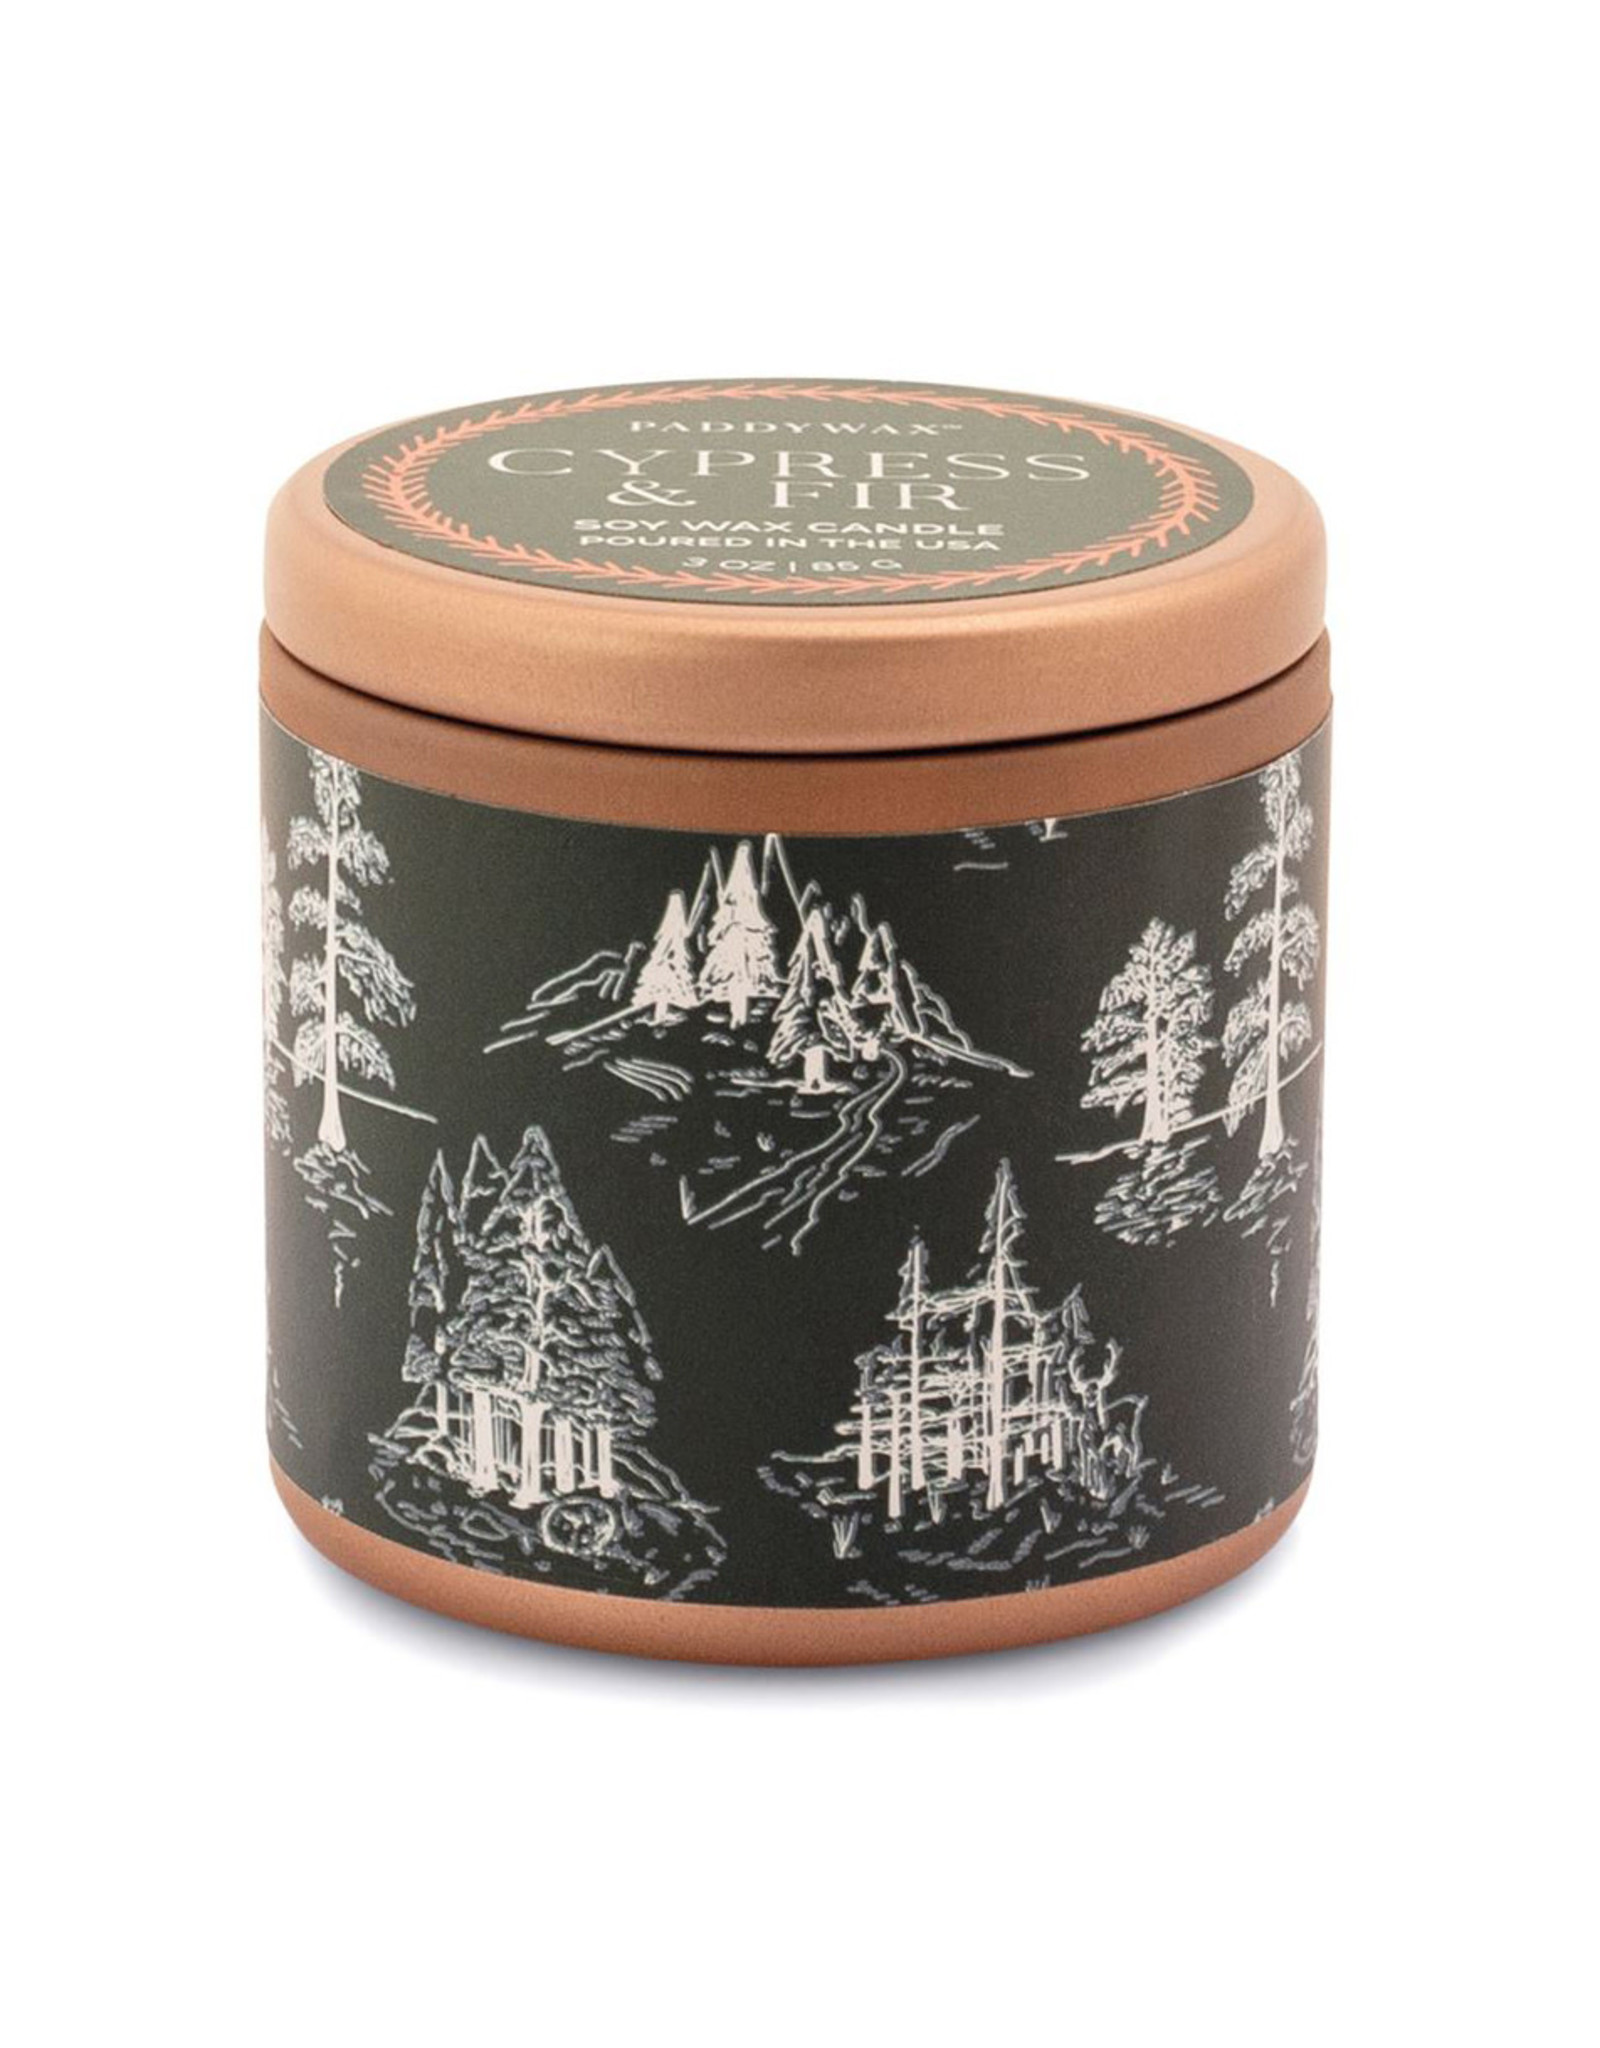 Paddywax Cypress & Fir 3oz Copper Tin Candle + Green Label with White Toile Pattern